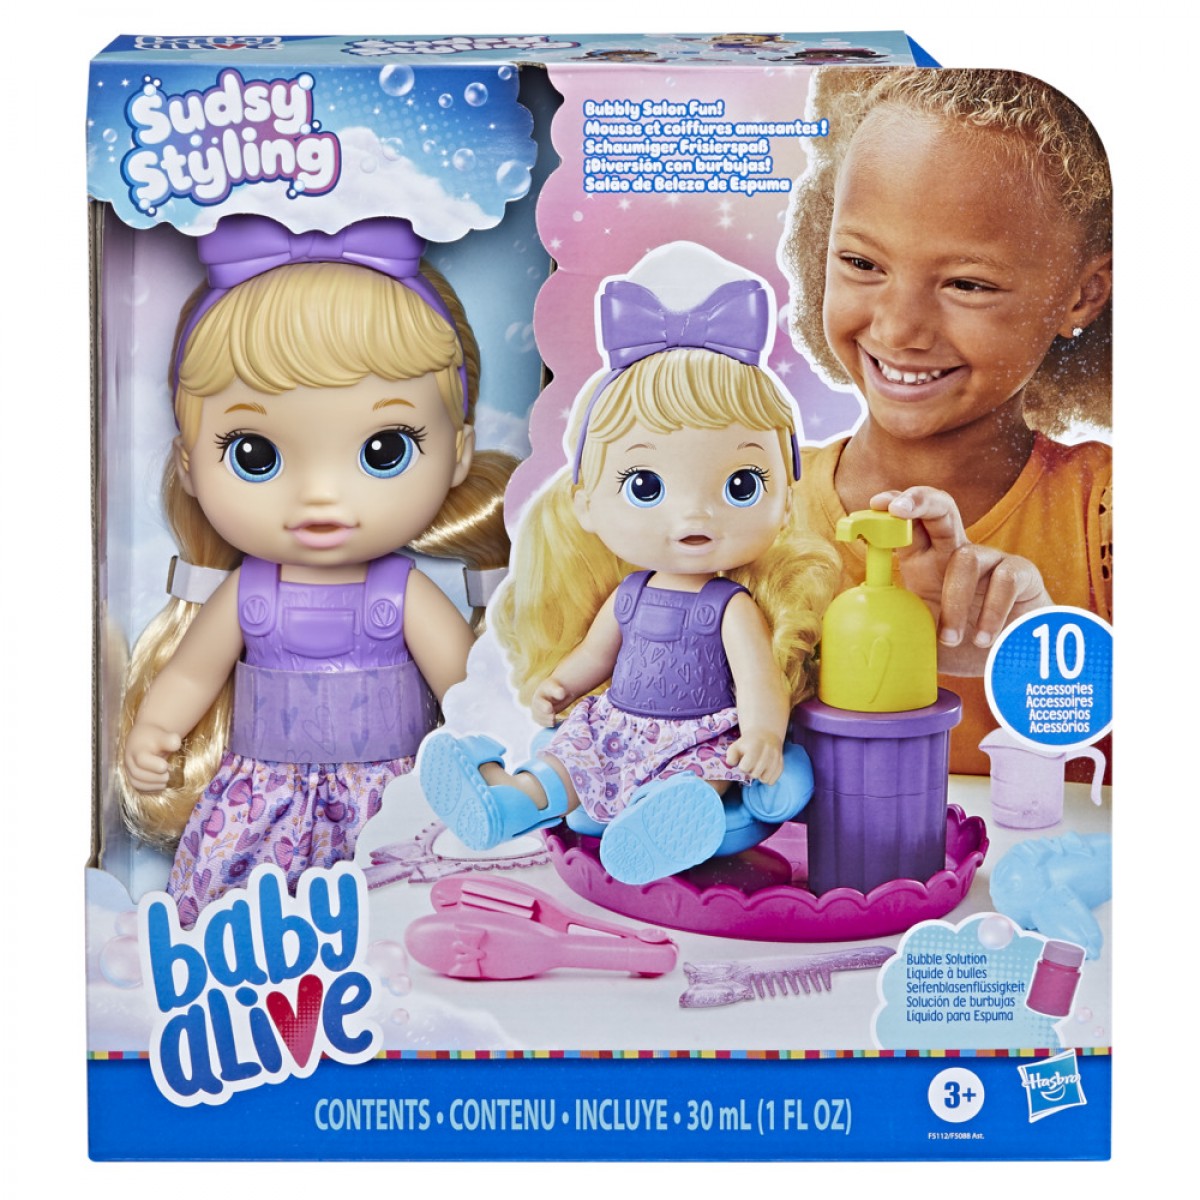 Baby Alive Sudsy Styling Doll, 12 Inch, 3Yrs+